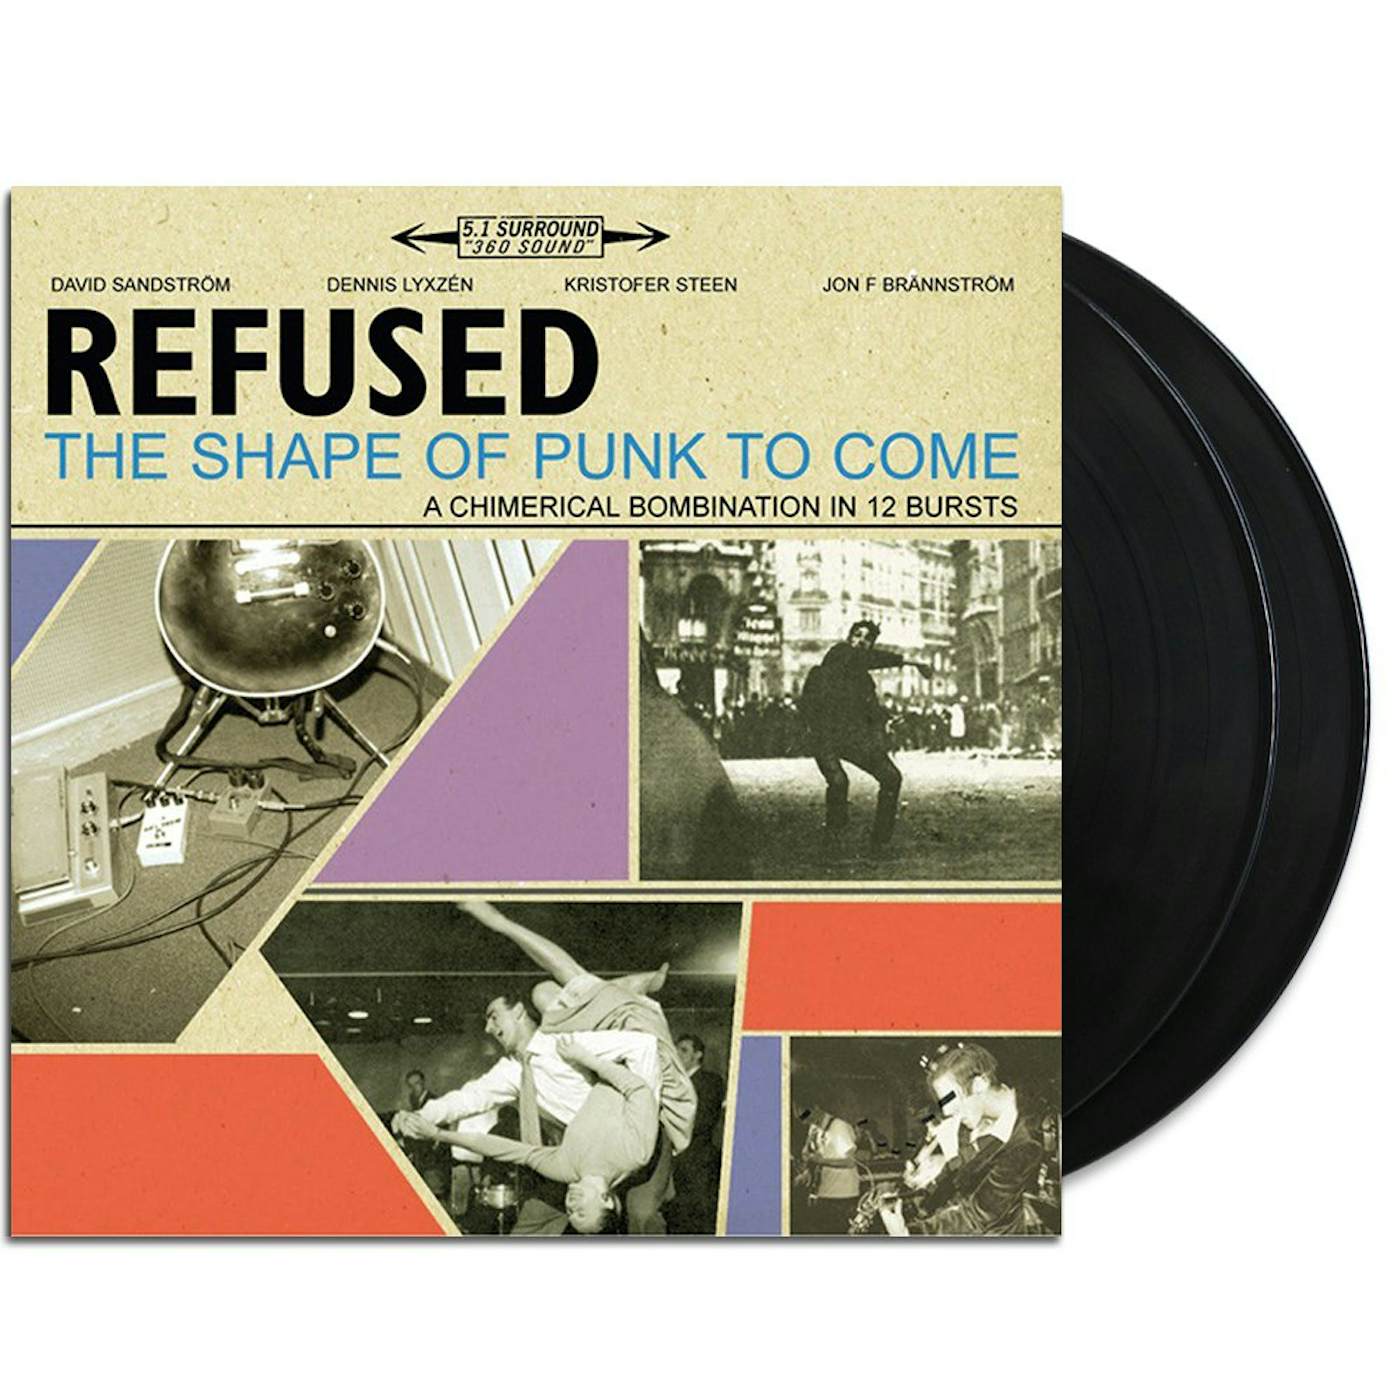 Refused - The Shape Of Punk To Come 2xLP (Black) (Vinyl)